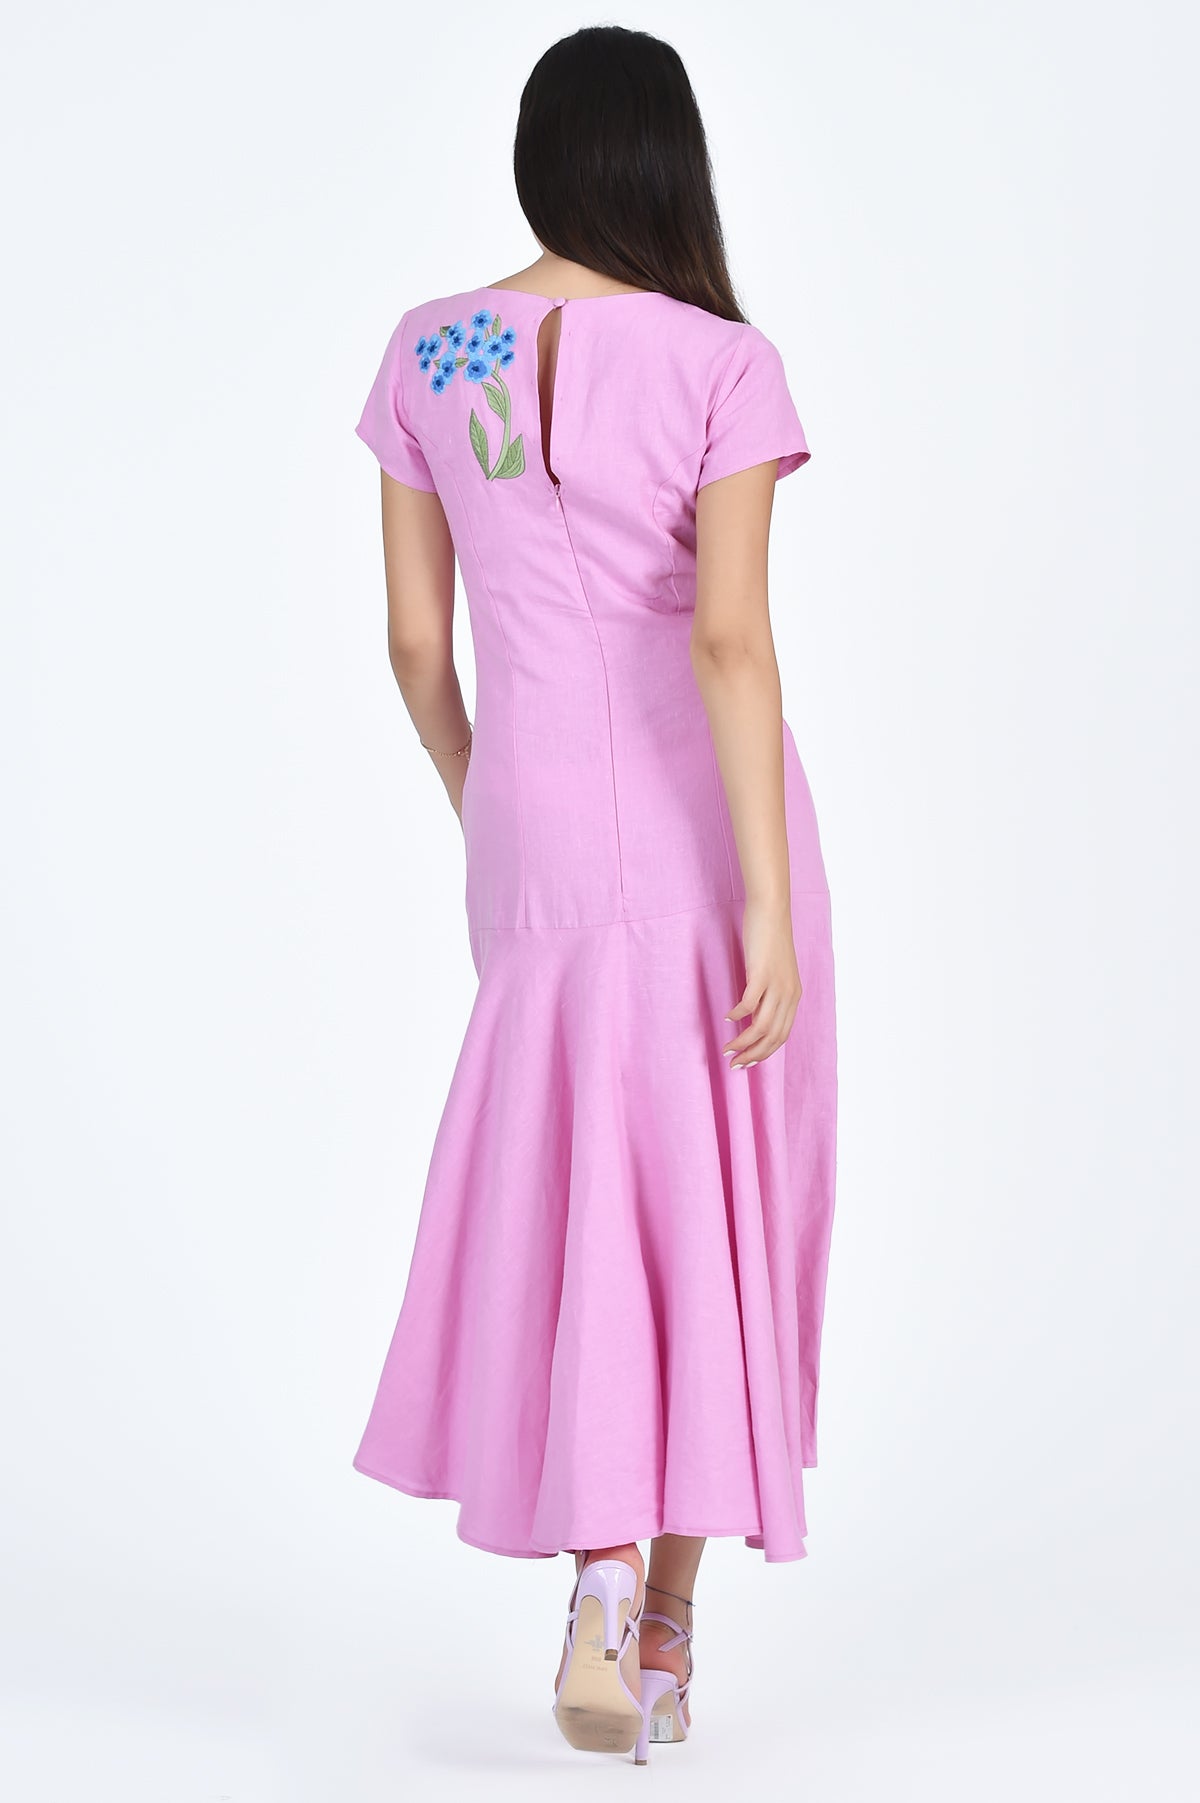 Fanm Mon Barbara Midi-Dress Back with hiddner zipper clousure and peekaboo back with Blue Floral Embroidery (Wombman Collection)